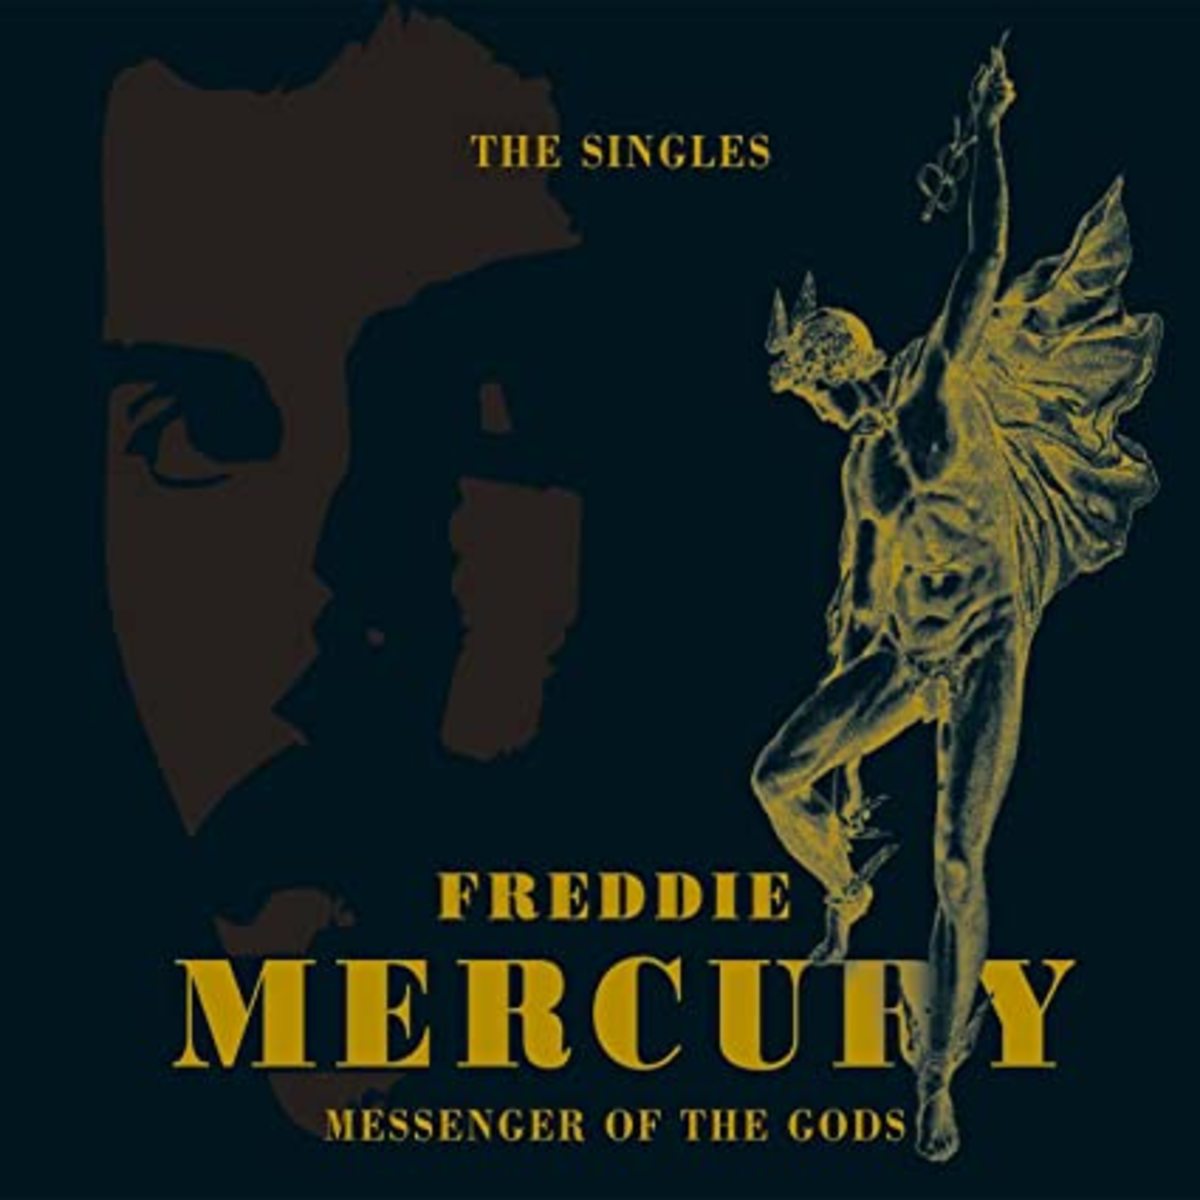 "Messenger Of The Gods" (2016) collects all of Freddie Mercury's singles on 2 CDs.